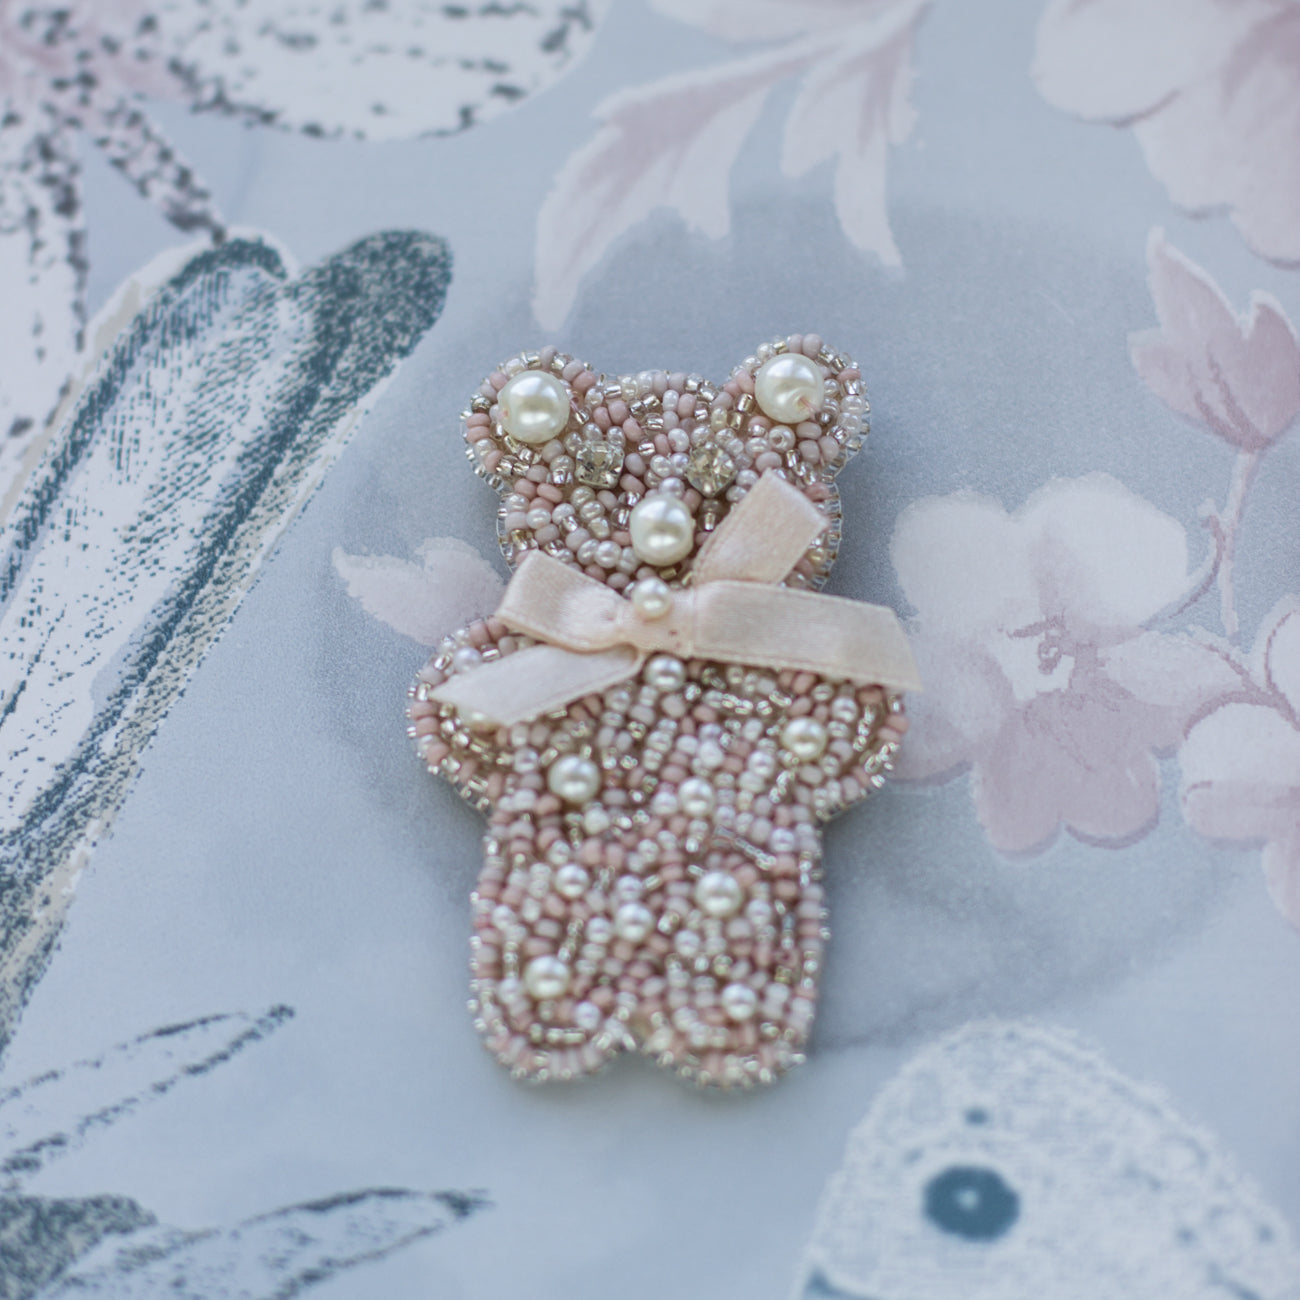 Shop women's jewelry at LeFlowers Bijouterie to discover unique handmade pieces for your wardrobe.   Pink embroidered brooch. Gift idea. Handmade bear brooch. Teddy bear accessories. Kids accessories. Brooch for kids